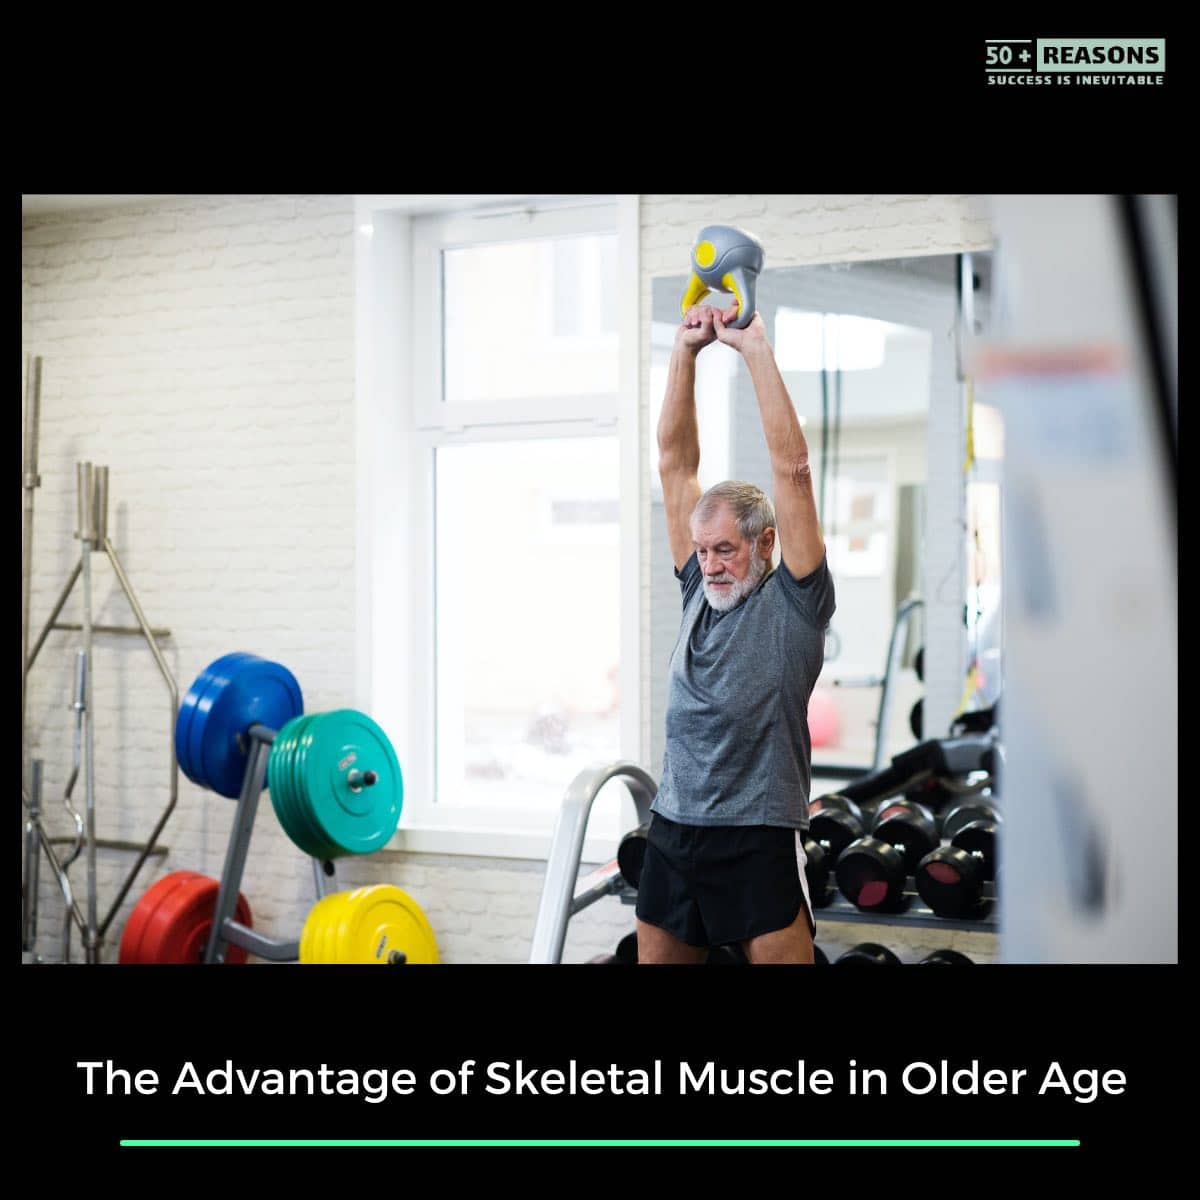 The Advantage of Skeletal Muscle in Older Age